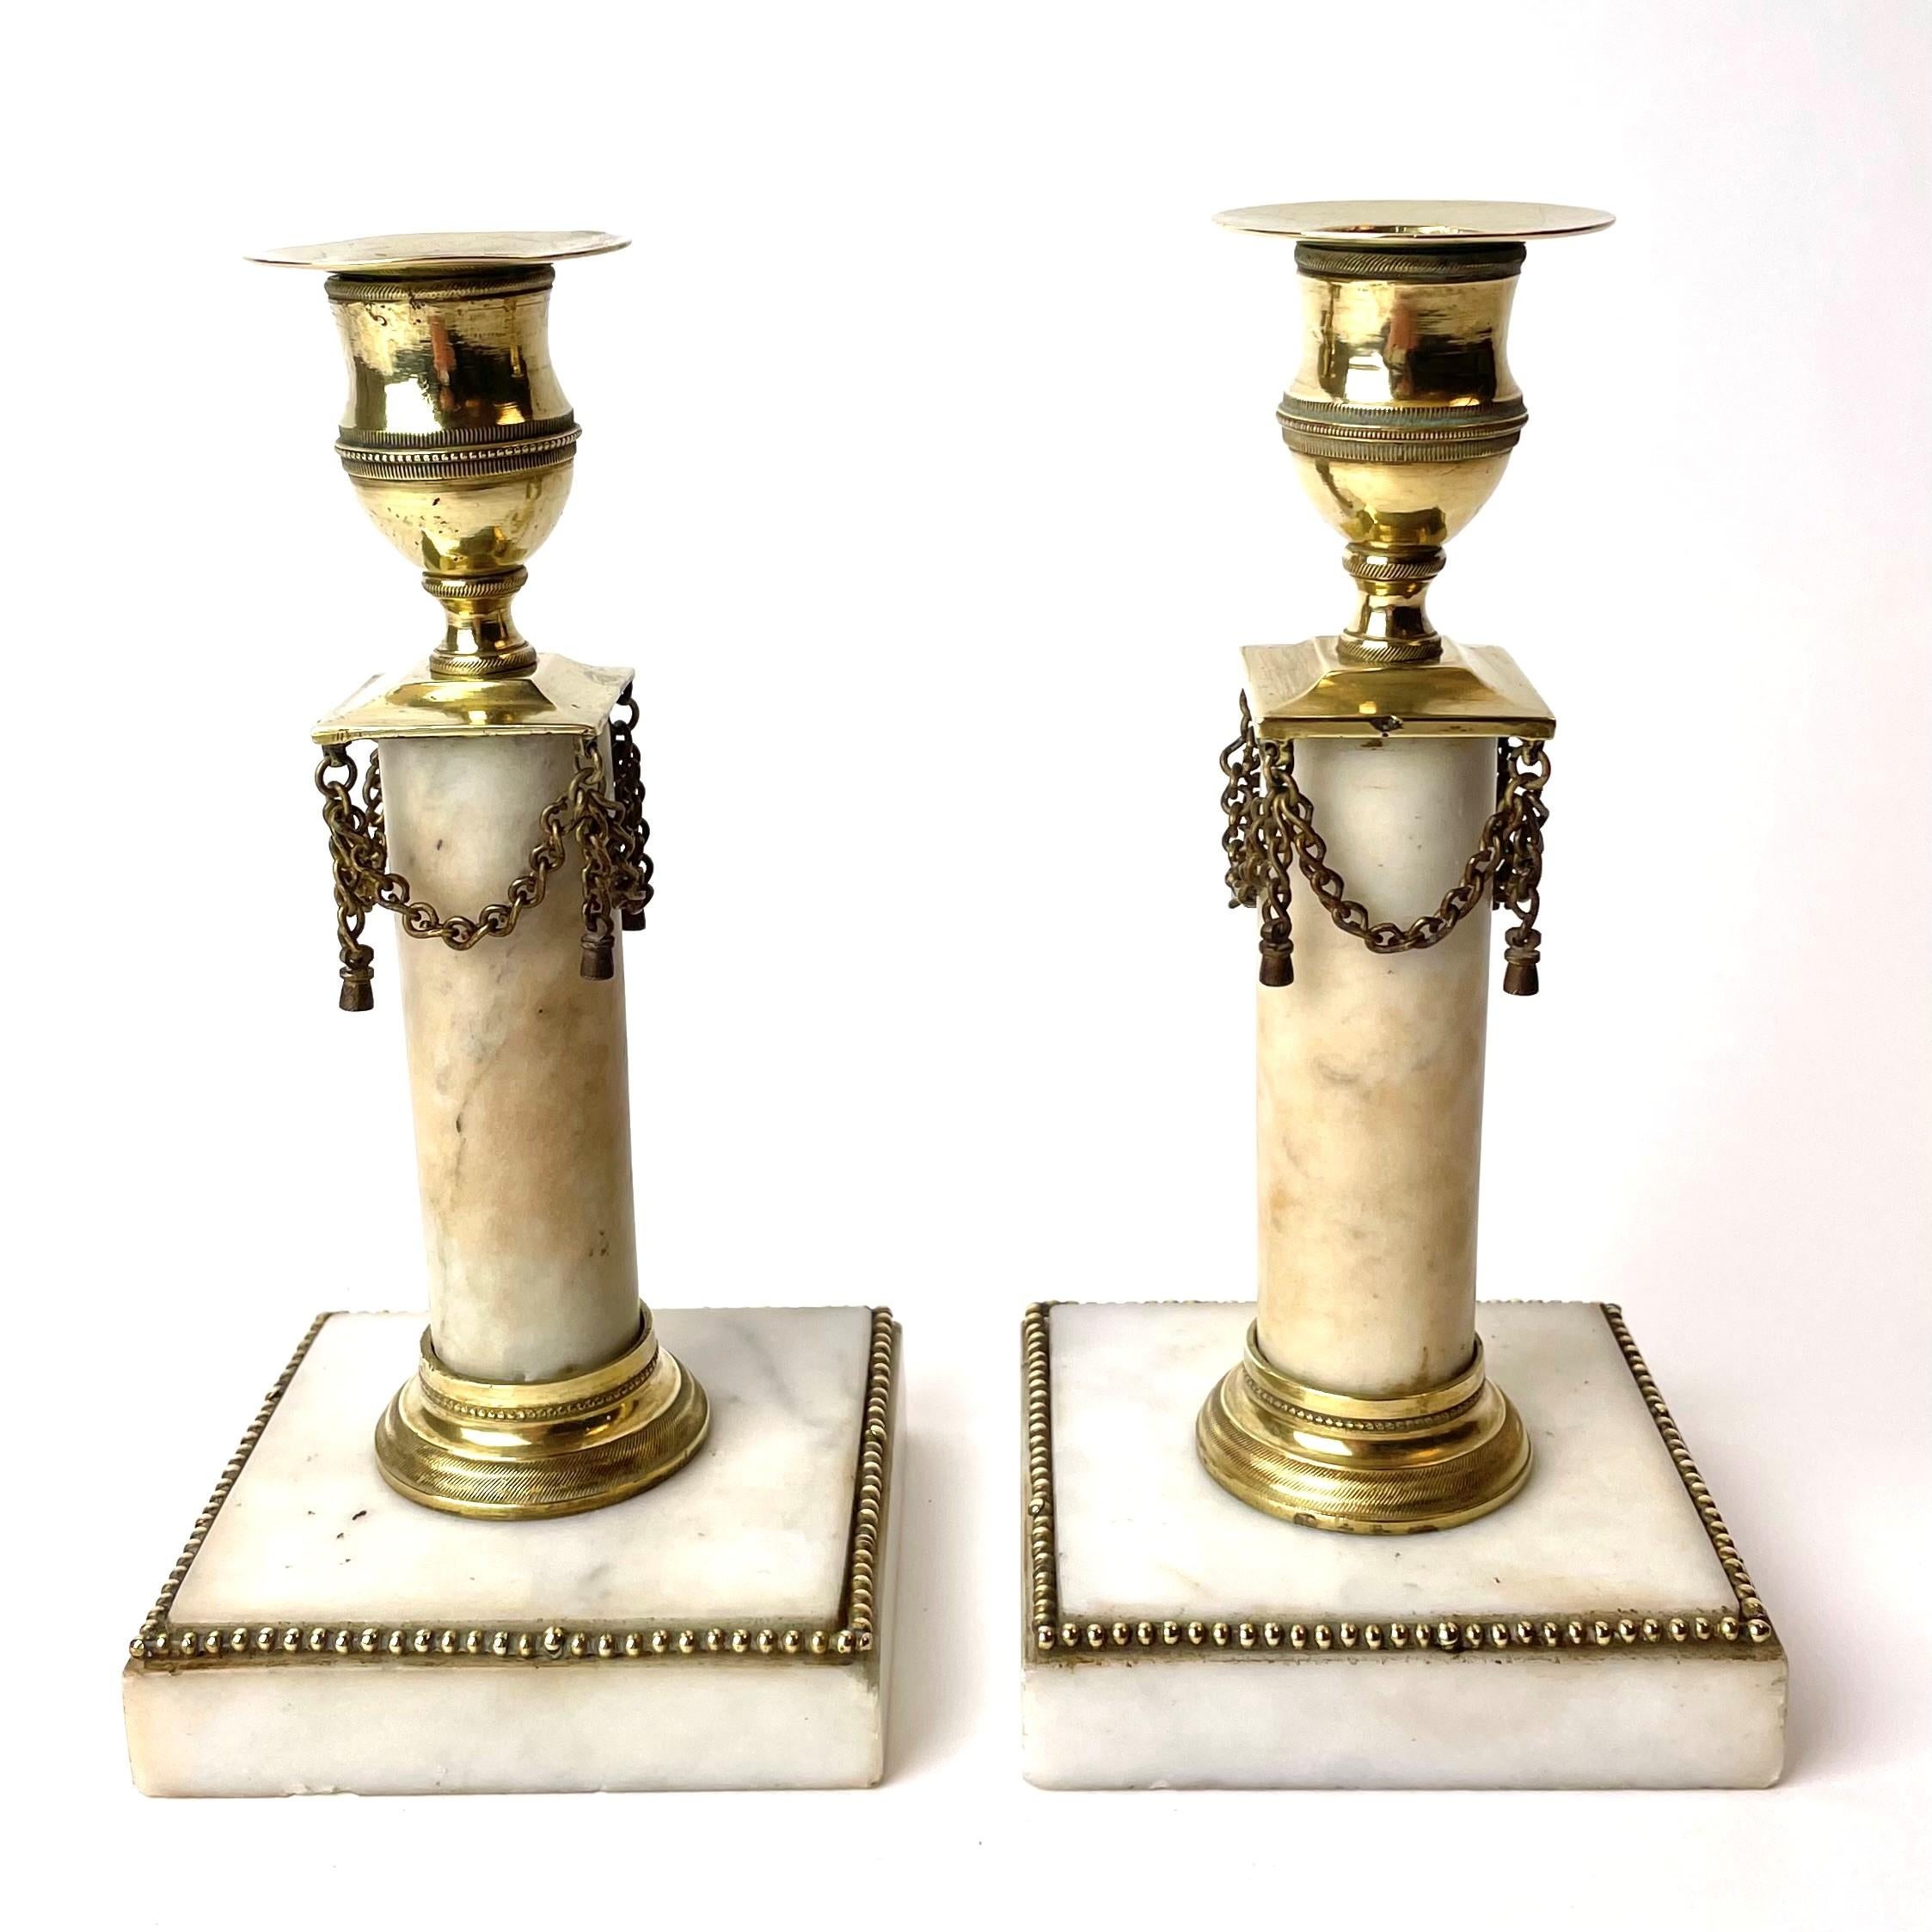 A pair of Swedish Gustavian candlesticks with beautiful patina. Probably made in Stockholm during the 1780s-1790s.

The candlesticks have minor marks, chips and discolorations (see pictures), but for their age they are in good condition with a